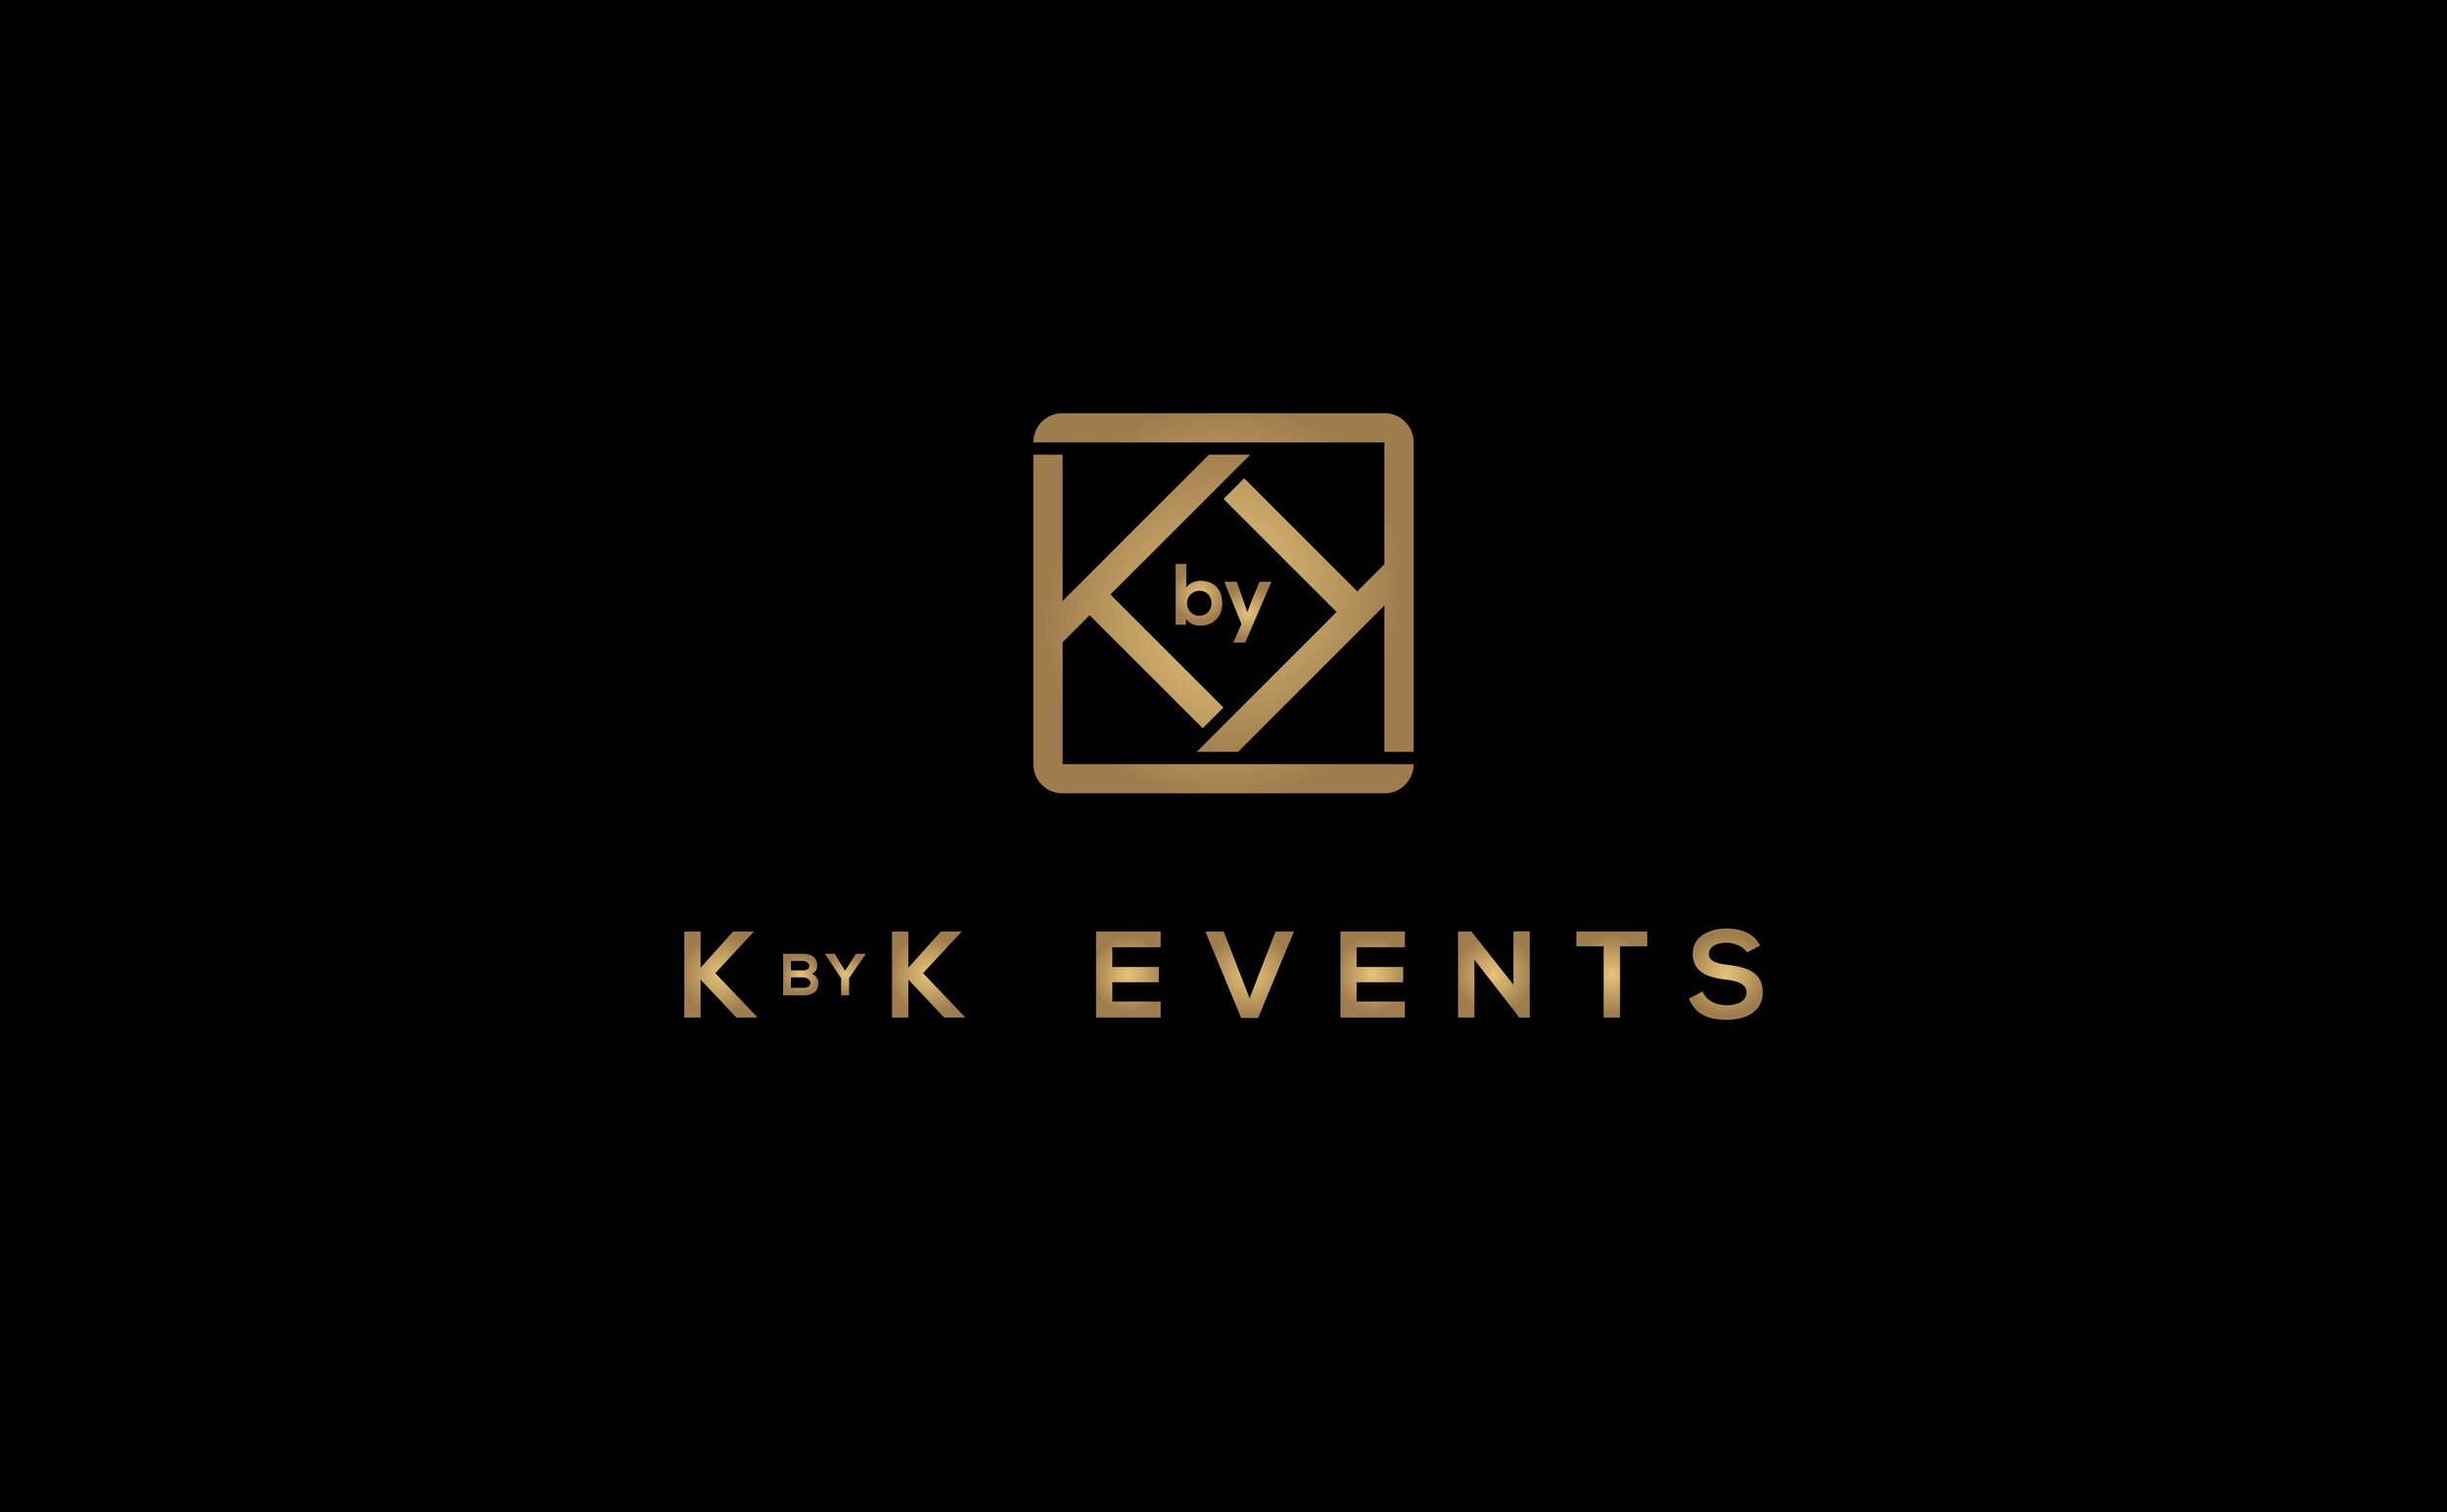 K by K Events